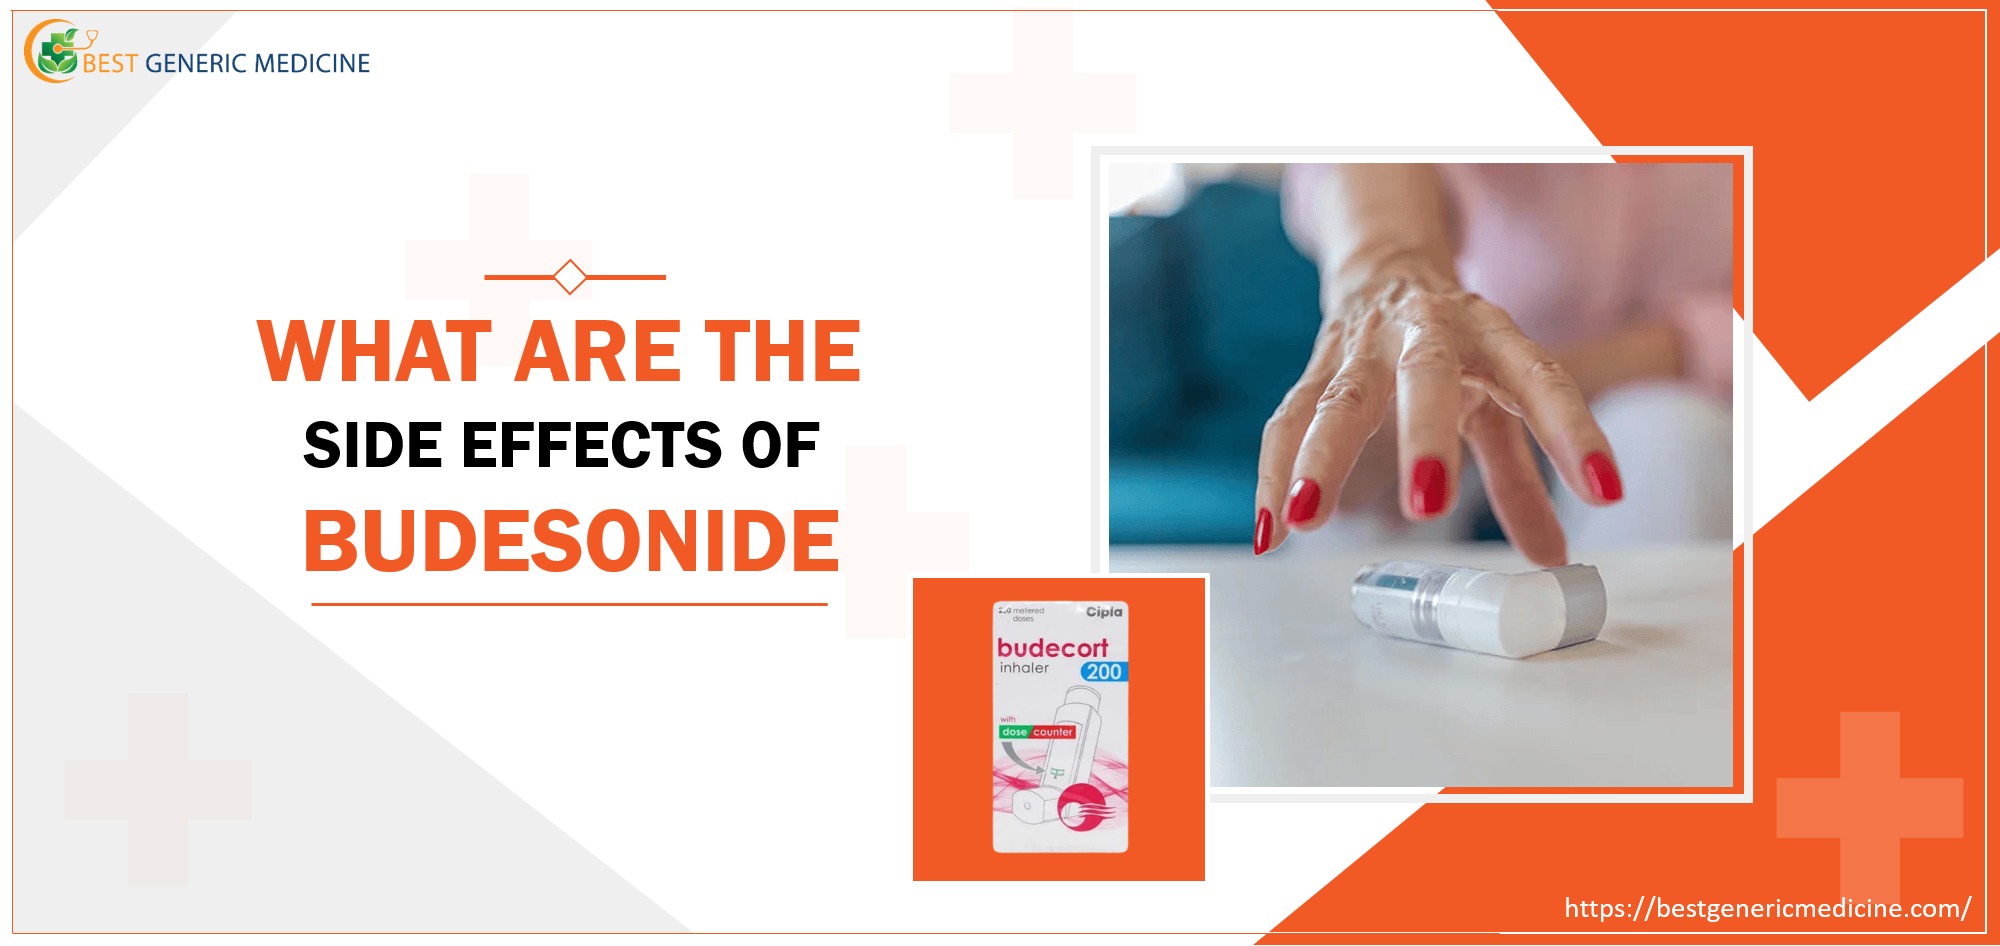 What are the side effects of Budesonide?